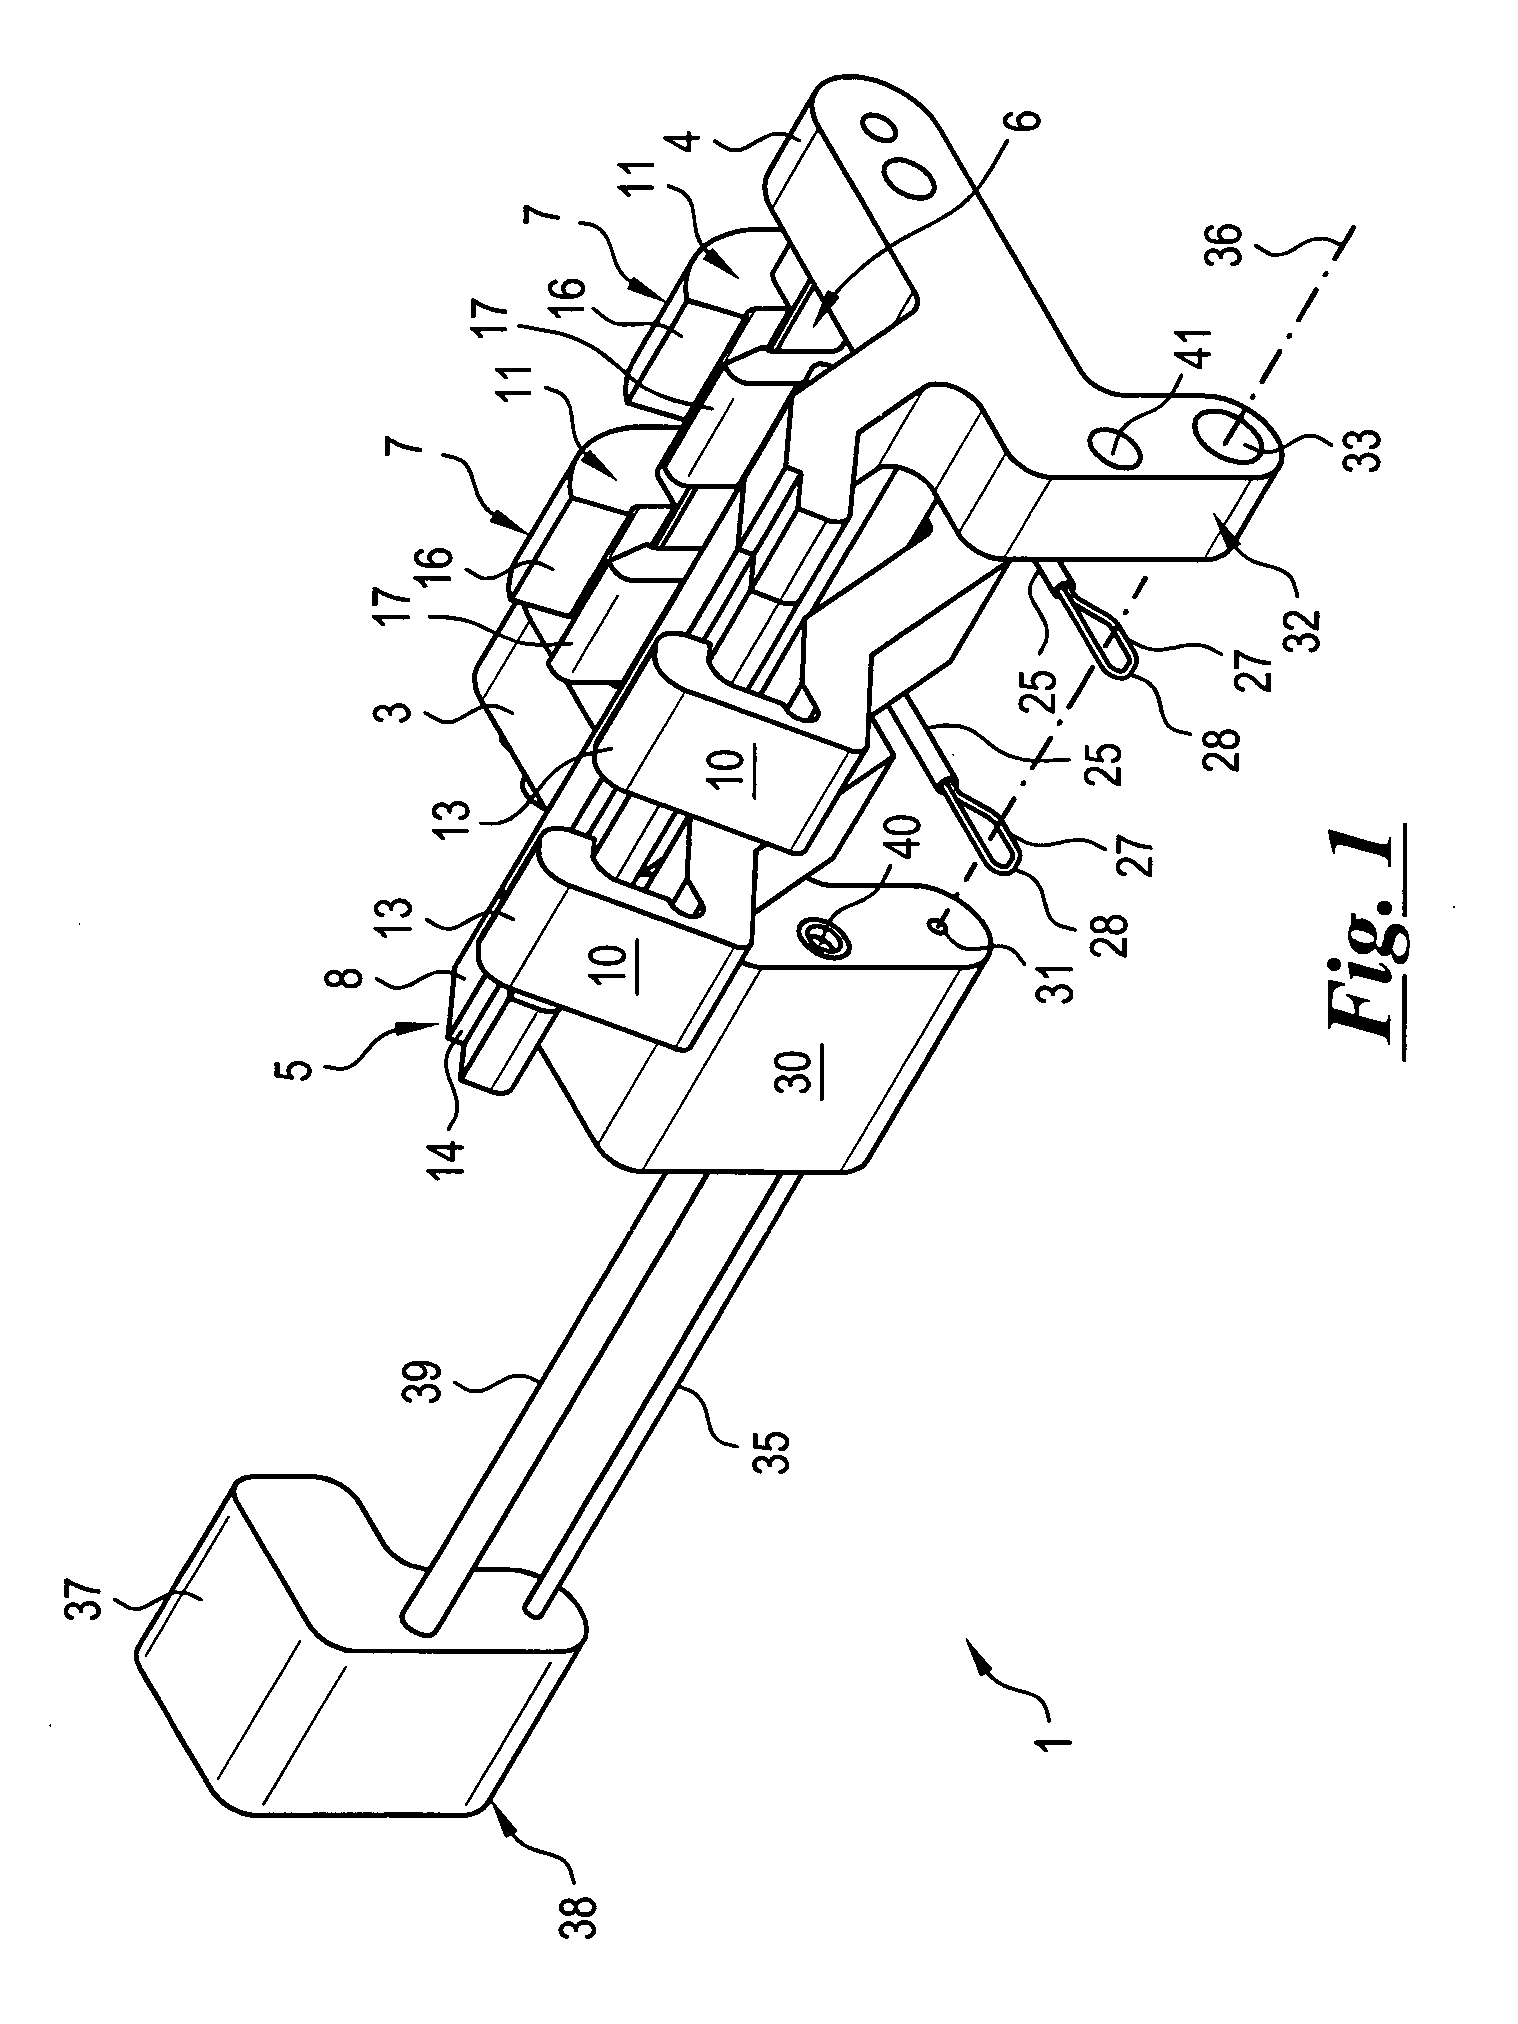 Surgical suturing device, method and tools used therewith